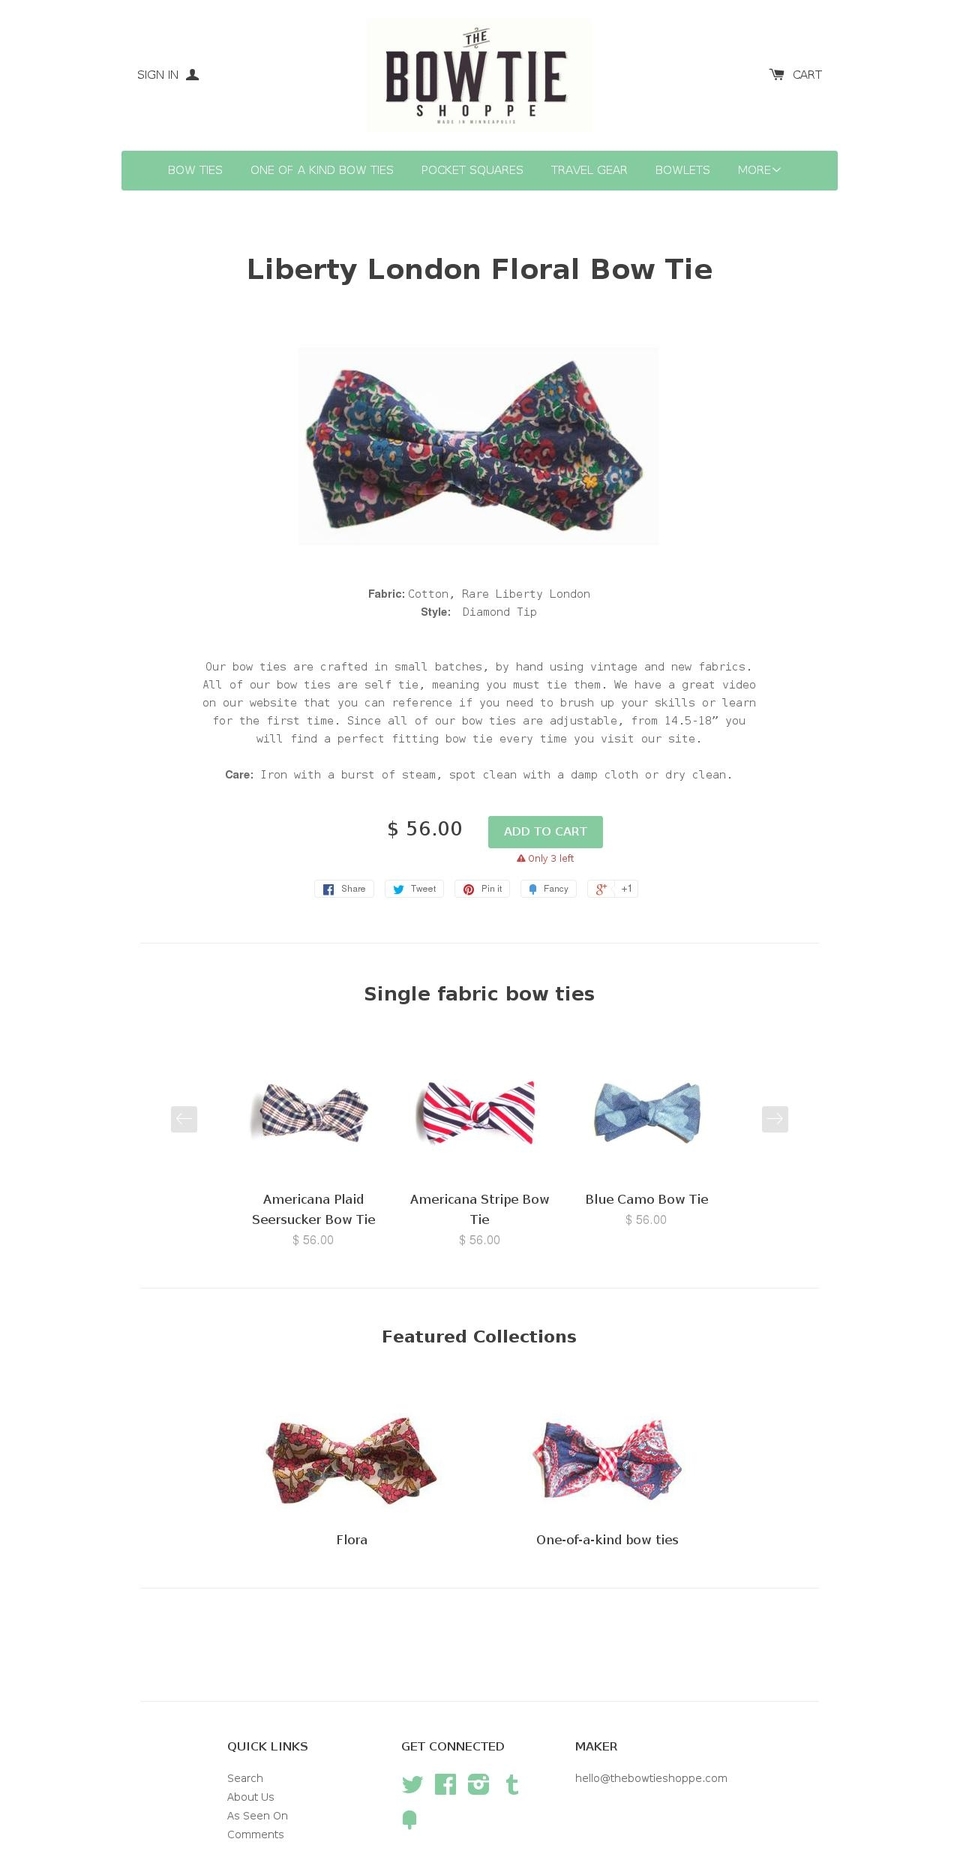 Solo Shopify theme site example thebowtieshoppe.com